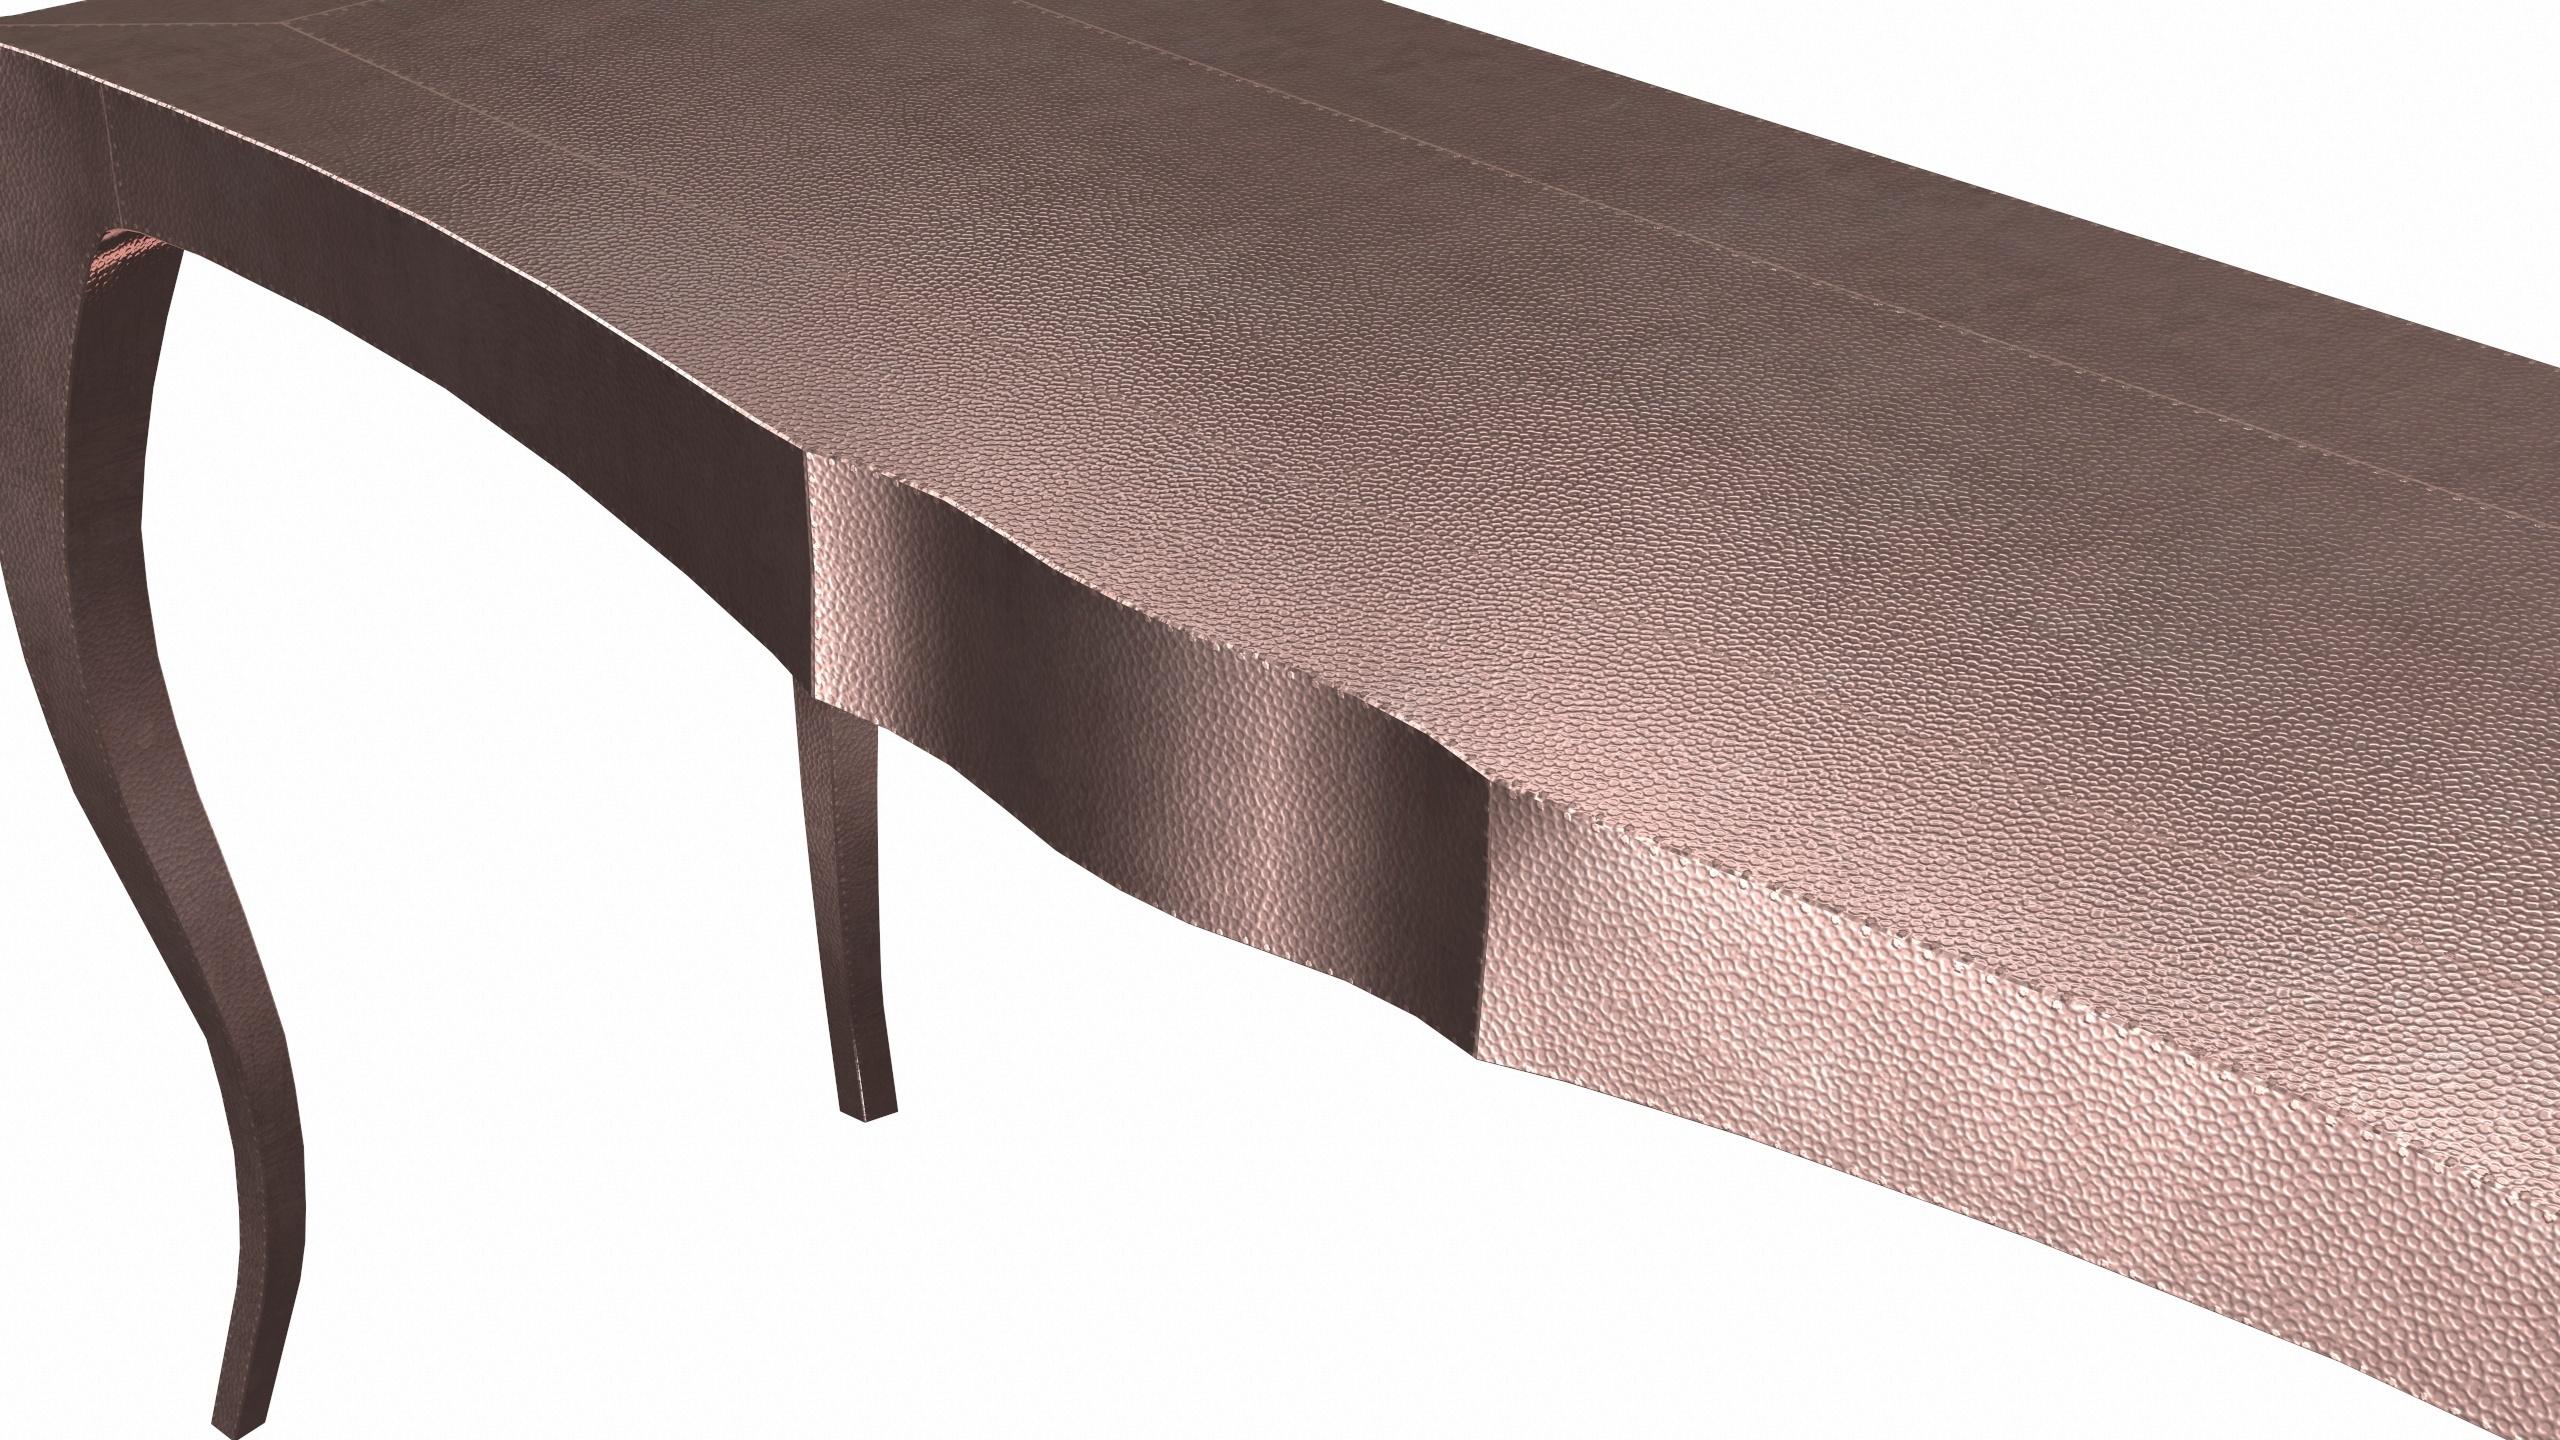 Contemporary Louise Console Art Nouveau Tray Tables Mid. Hammered Copper by Paul Mathieu  For Sale